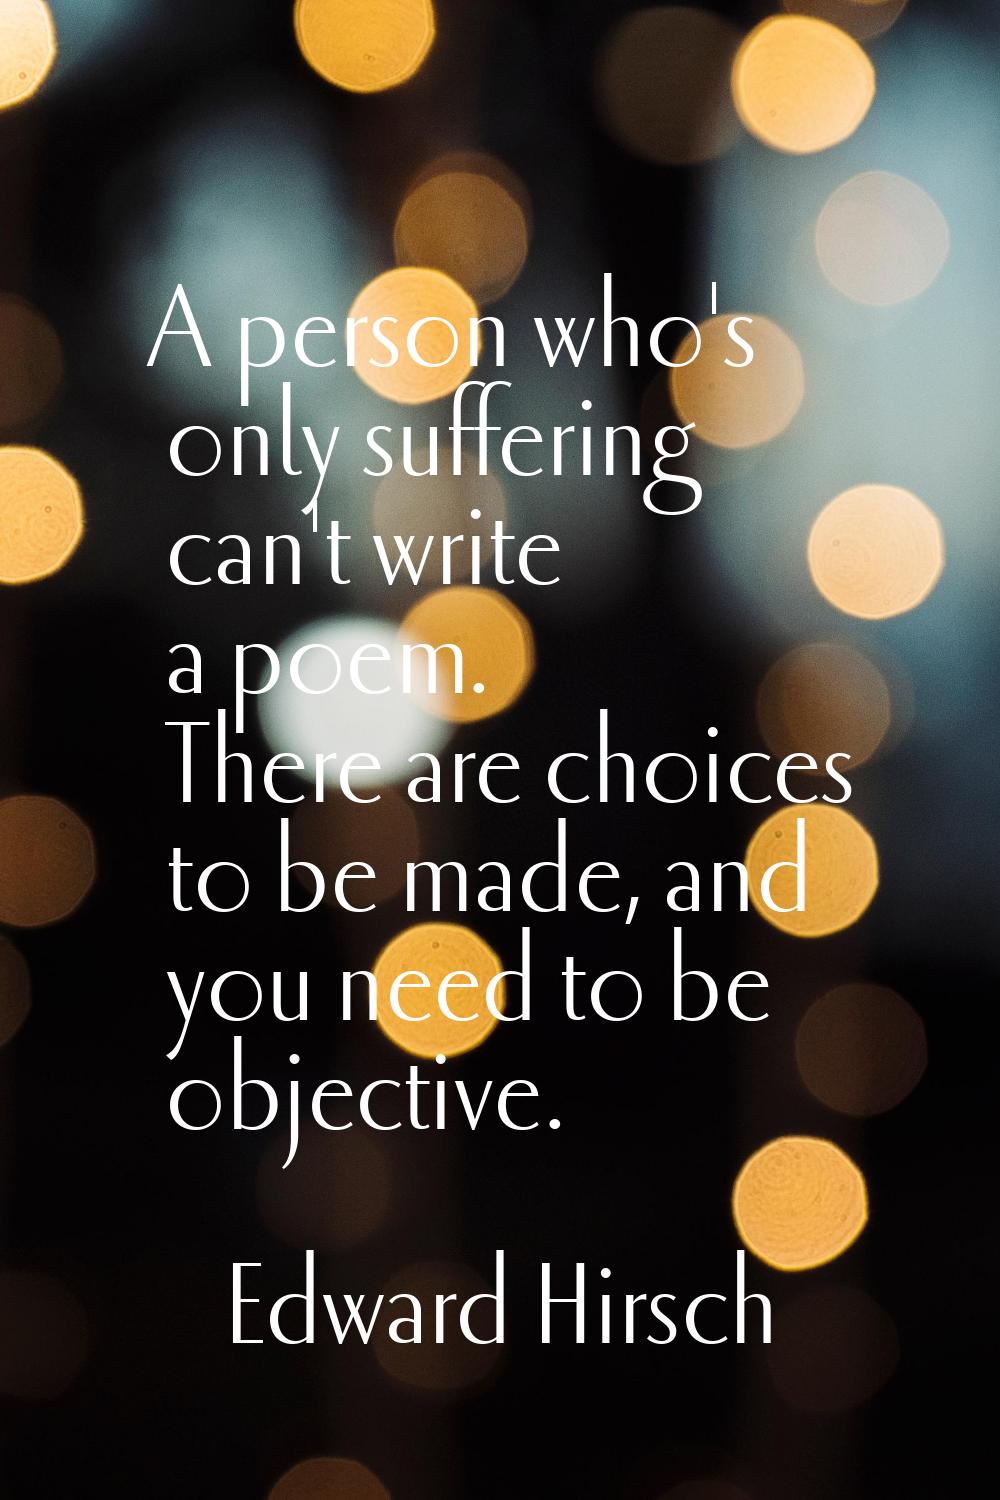 A person who's only suffering can't write a poem. There are choices to be made, and you need to be 